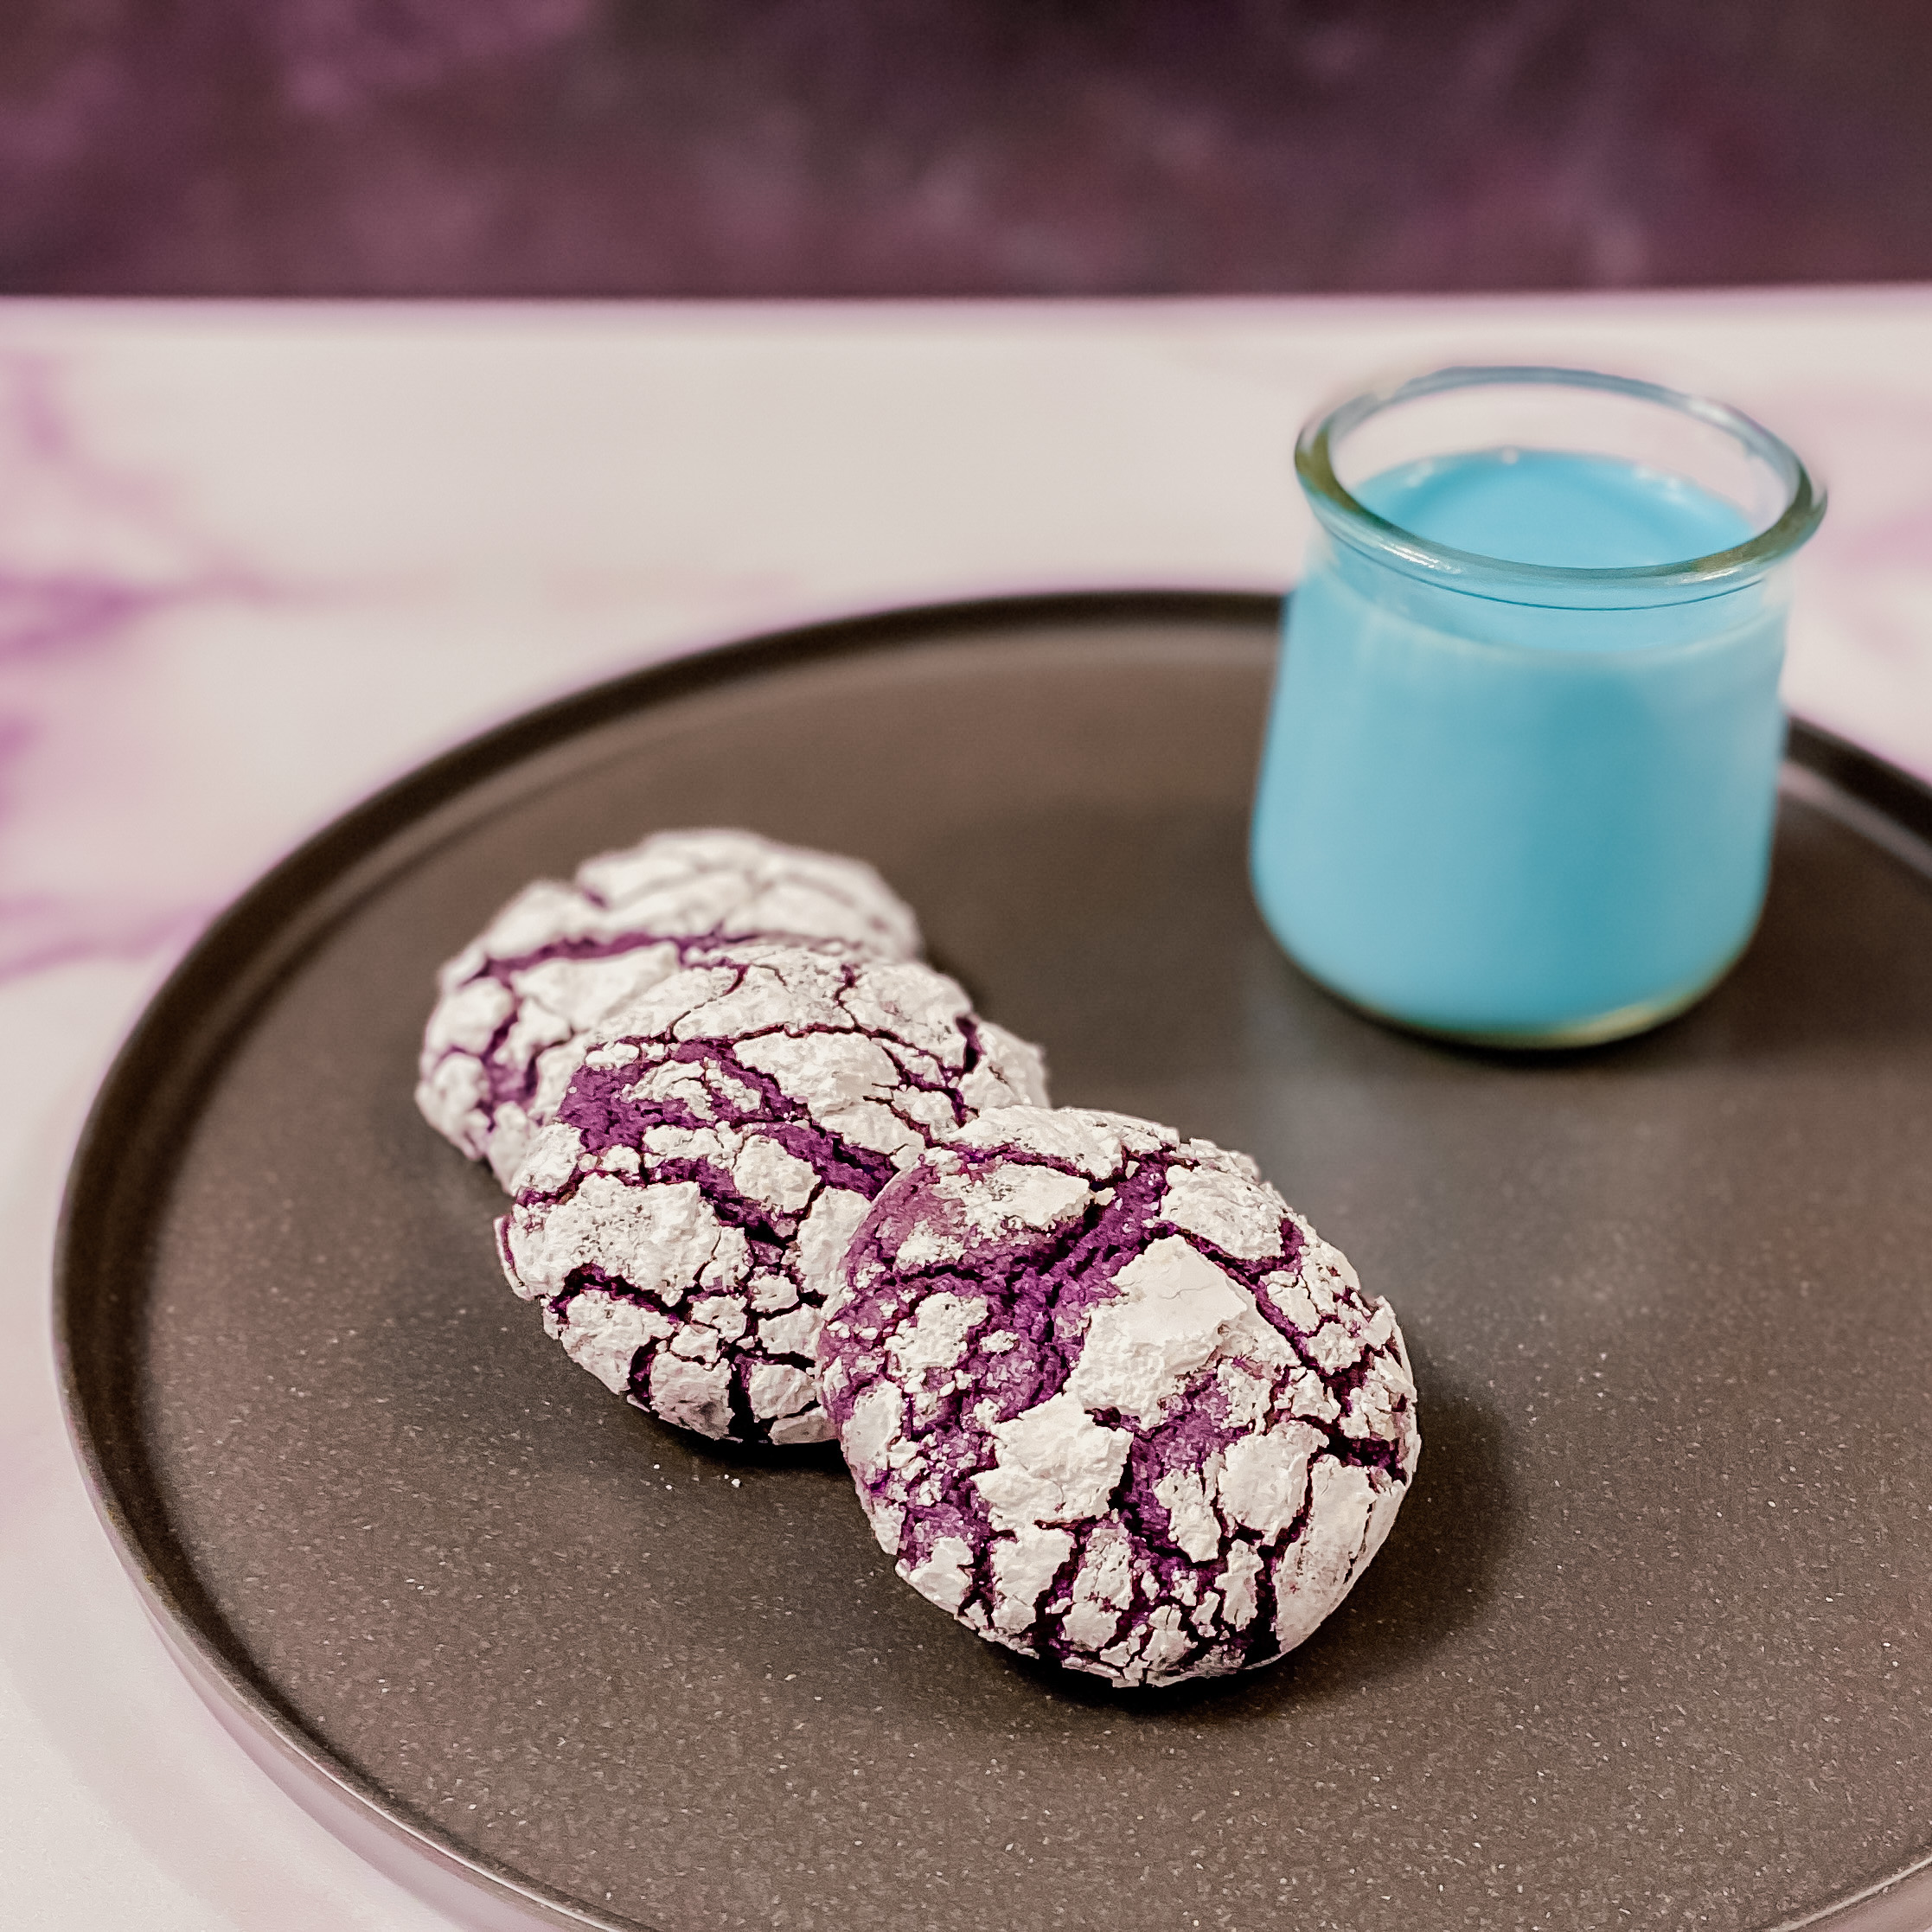 Star Wars Amethyst Sweetbread, Ube Cookies on a plate with a small glass of blue milk